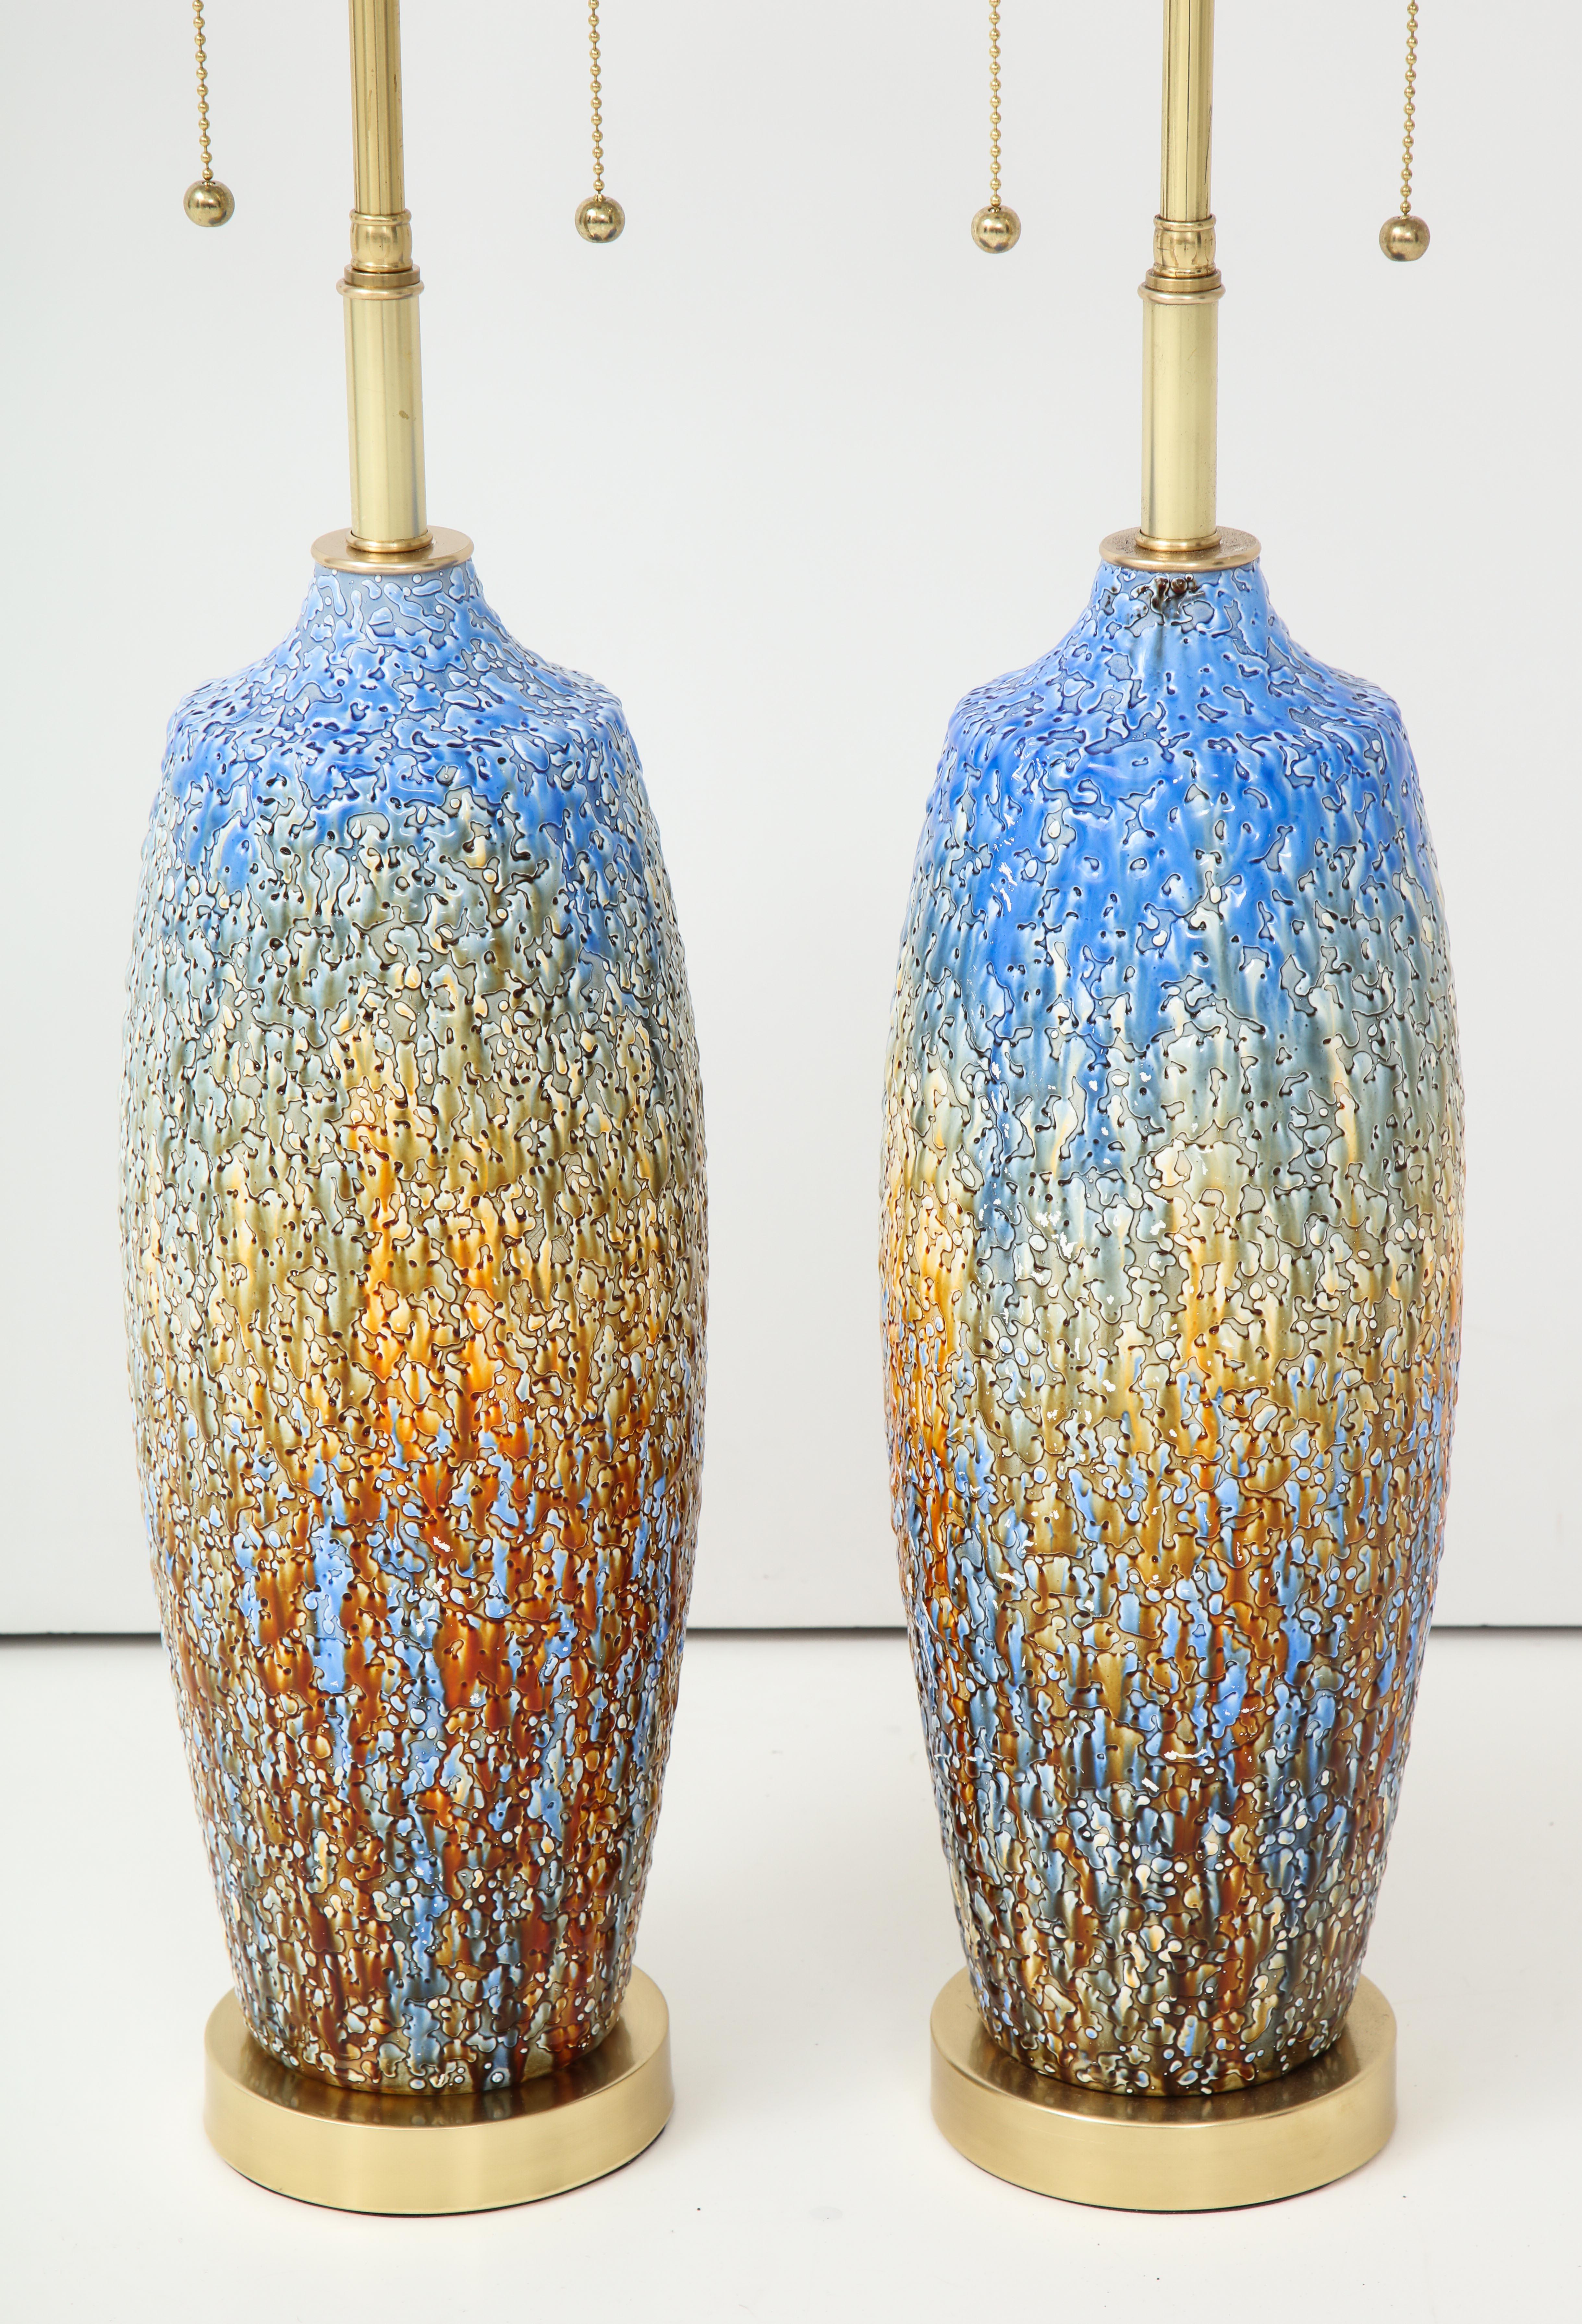 Pair of 1960s Italian ceramic lamps with a textured glaze finish.
The lamps are mounted on polished brass bases and they have
been newly rewired with polished brass double clusters.
        